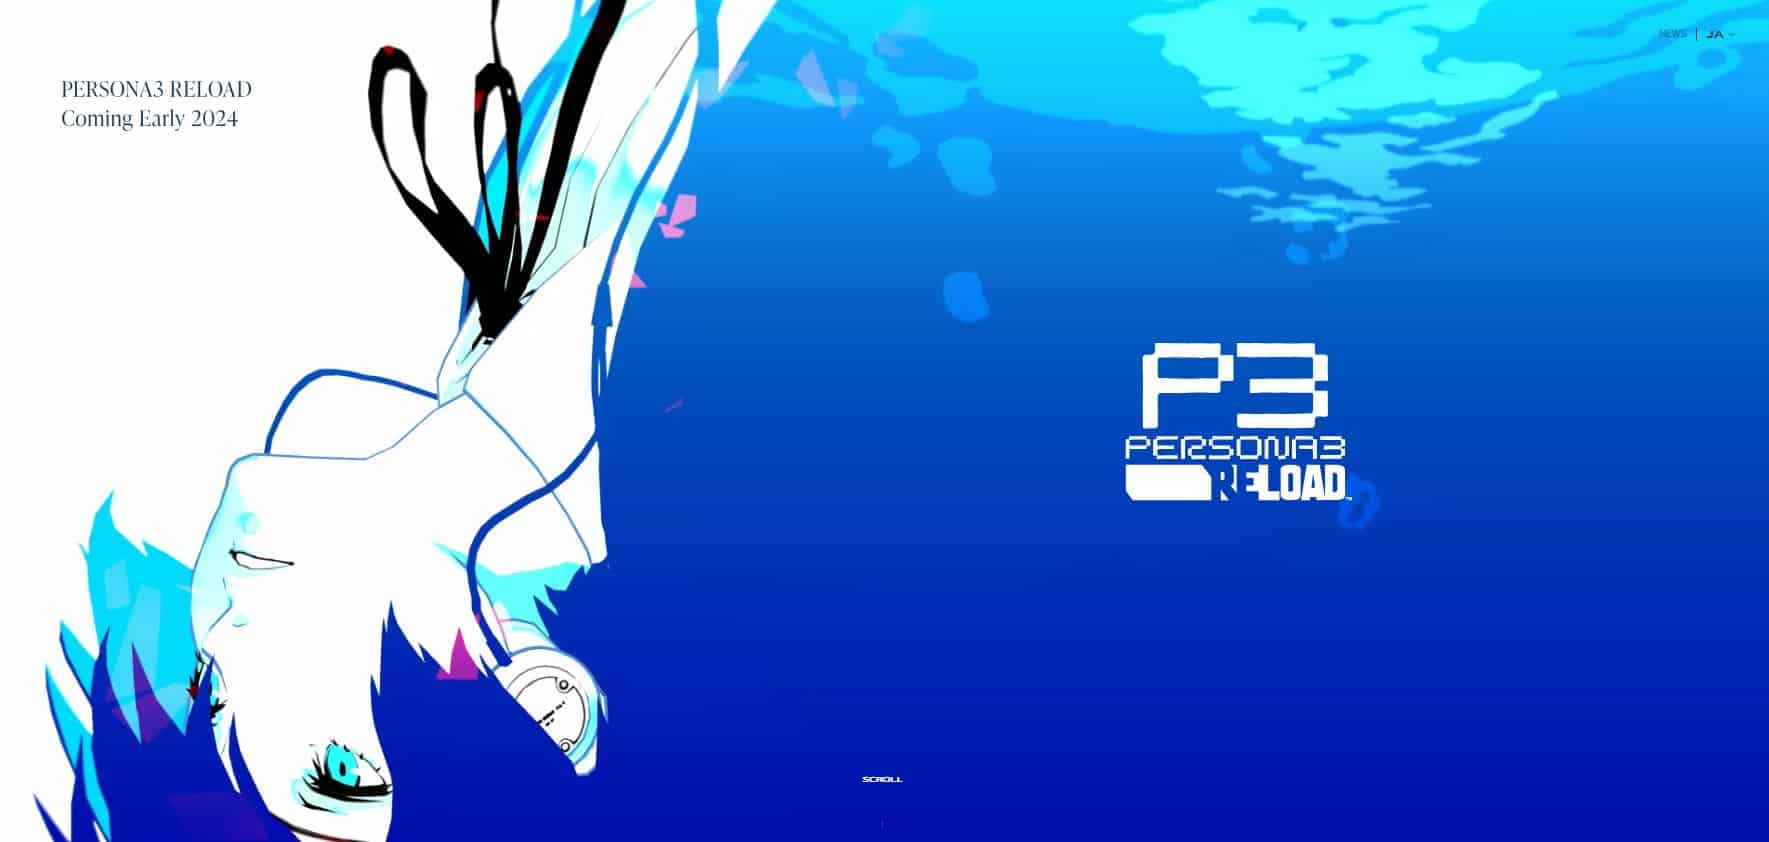 Persona 3 Reload Website: Here is Official URL Address & Availability